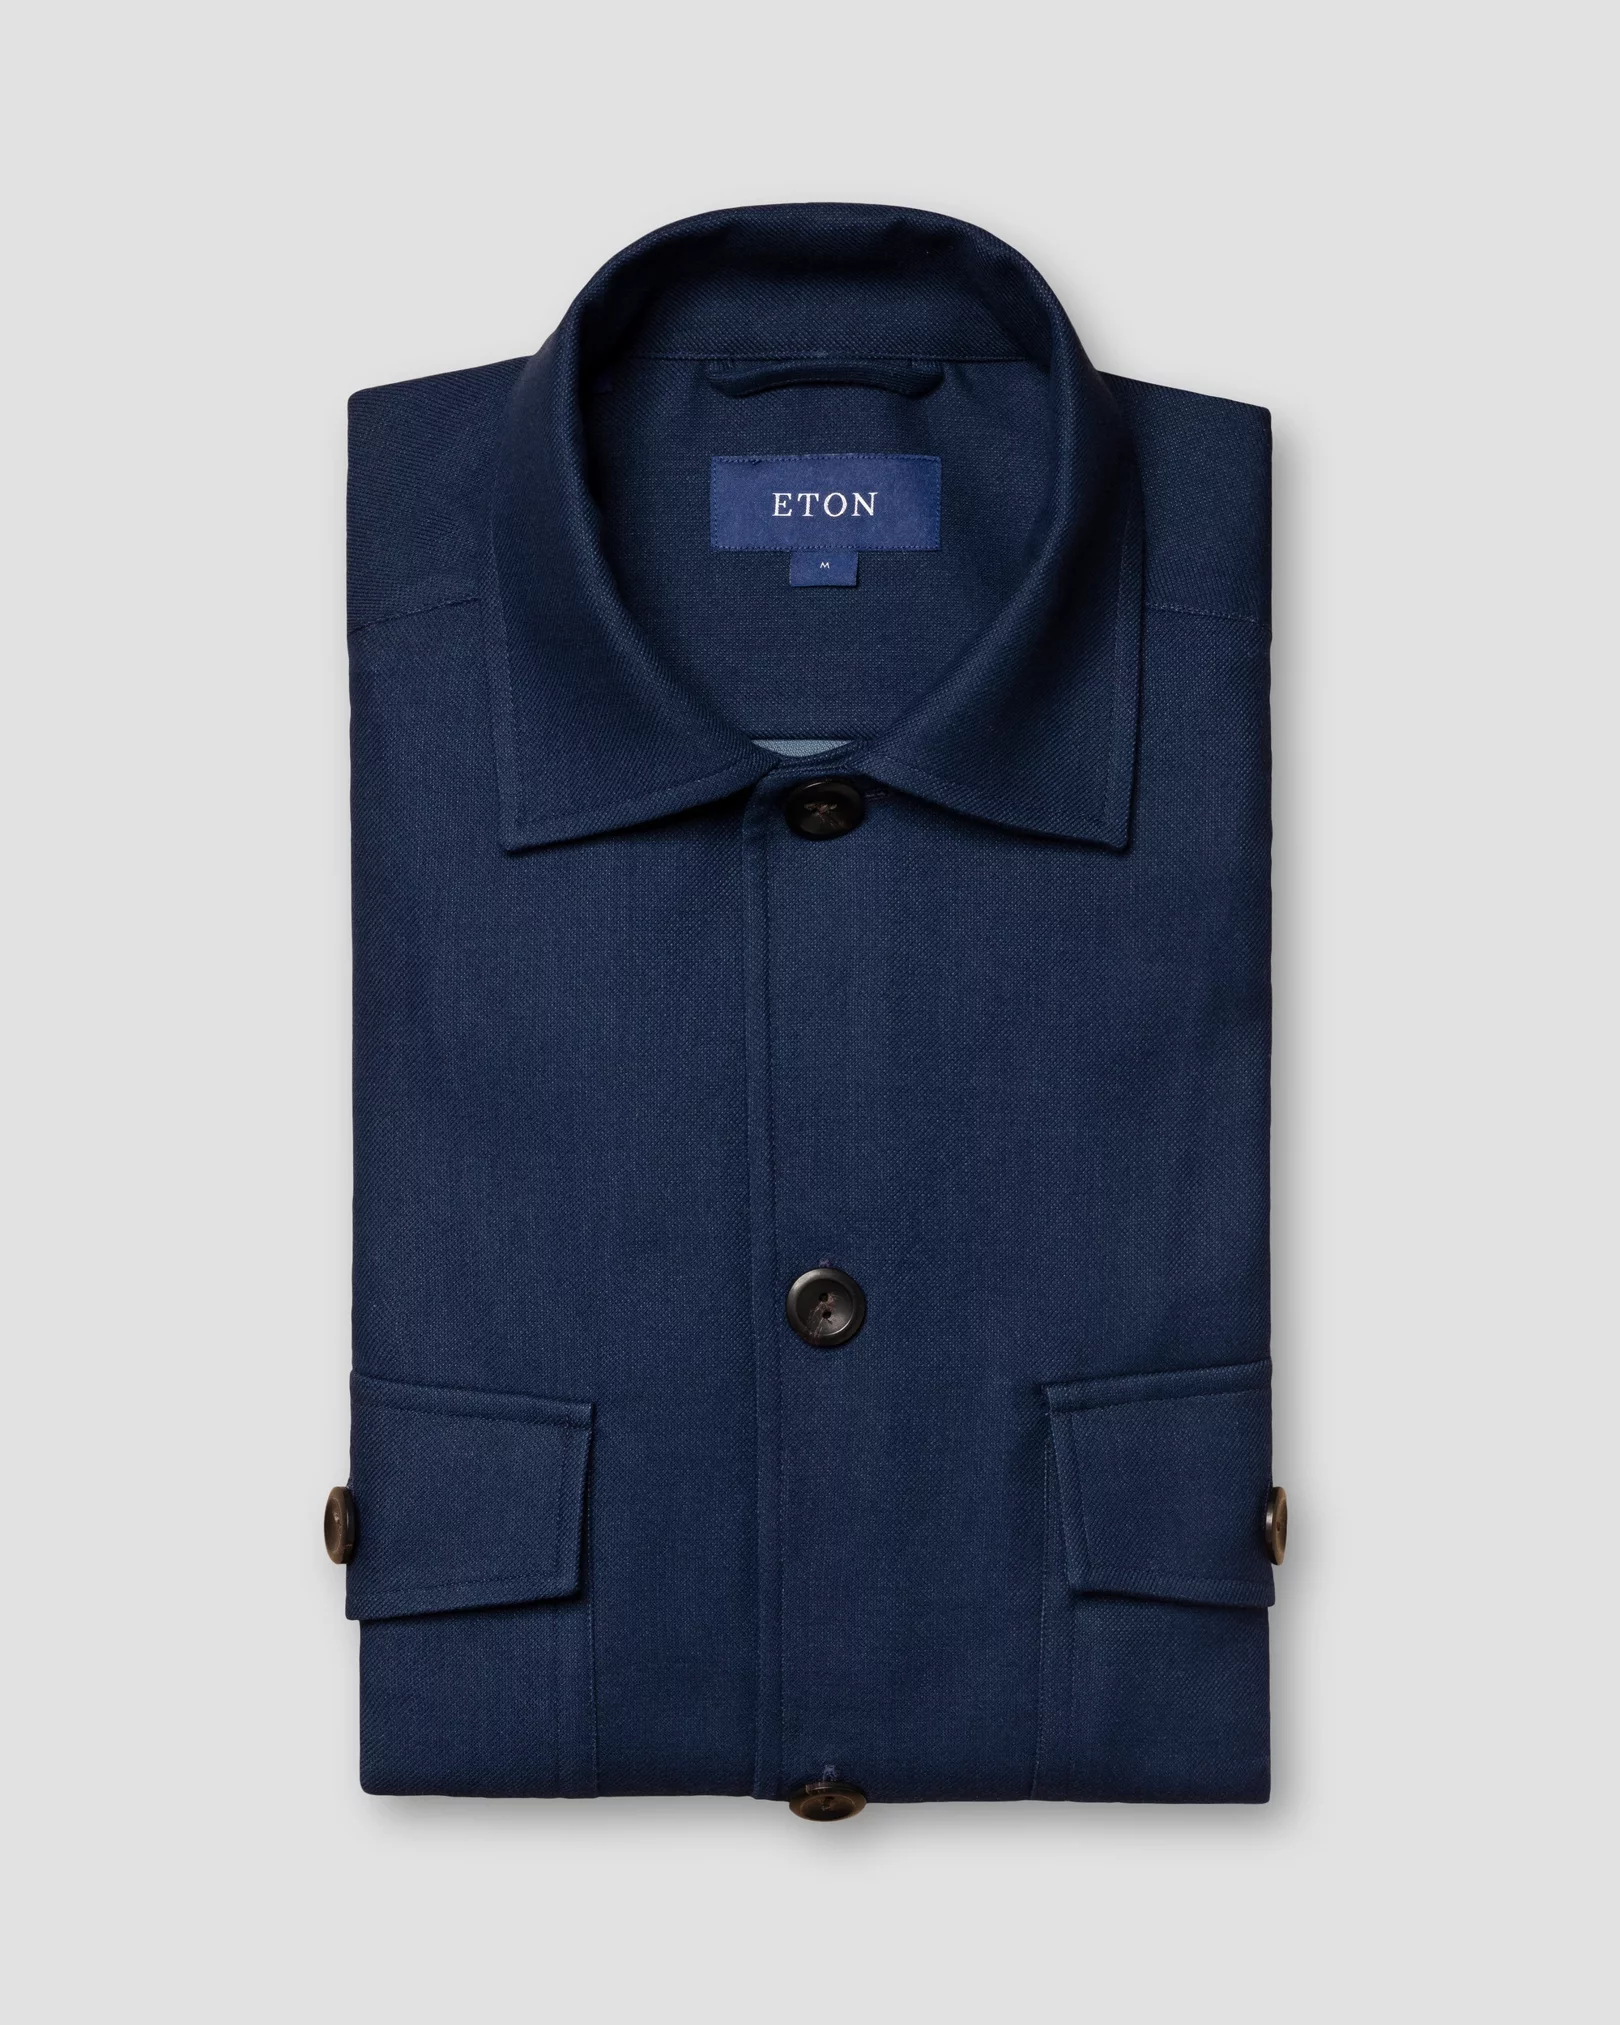 Eton - navy blue twill collar with no collarstand double round with piping regular